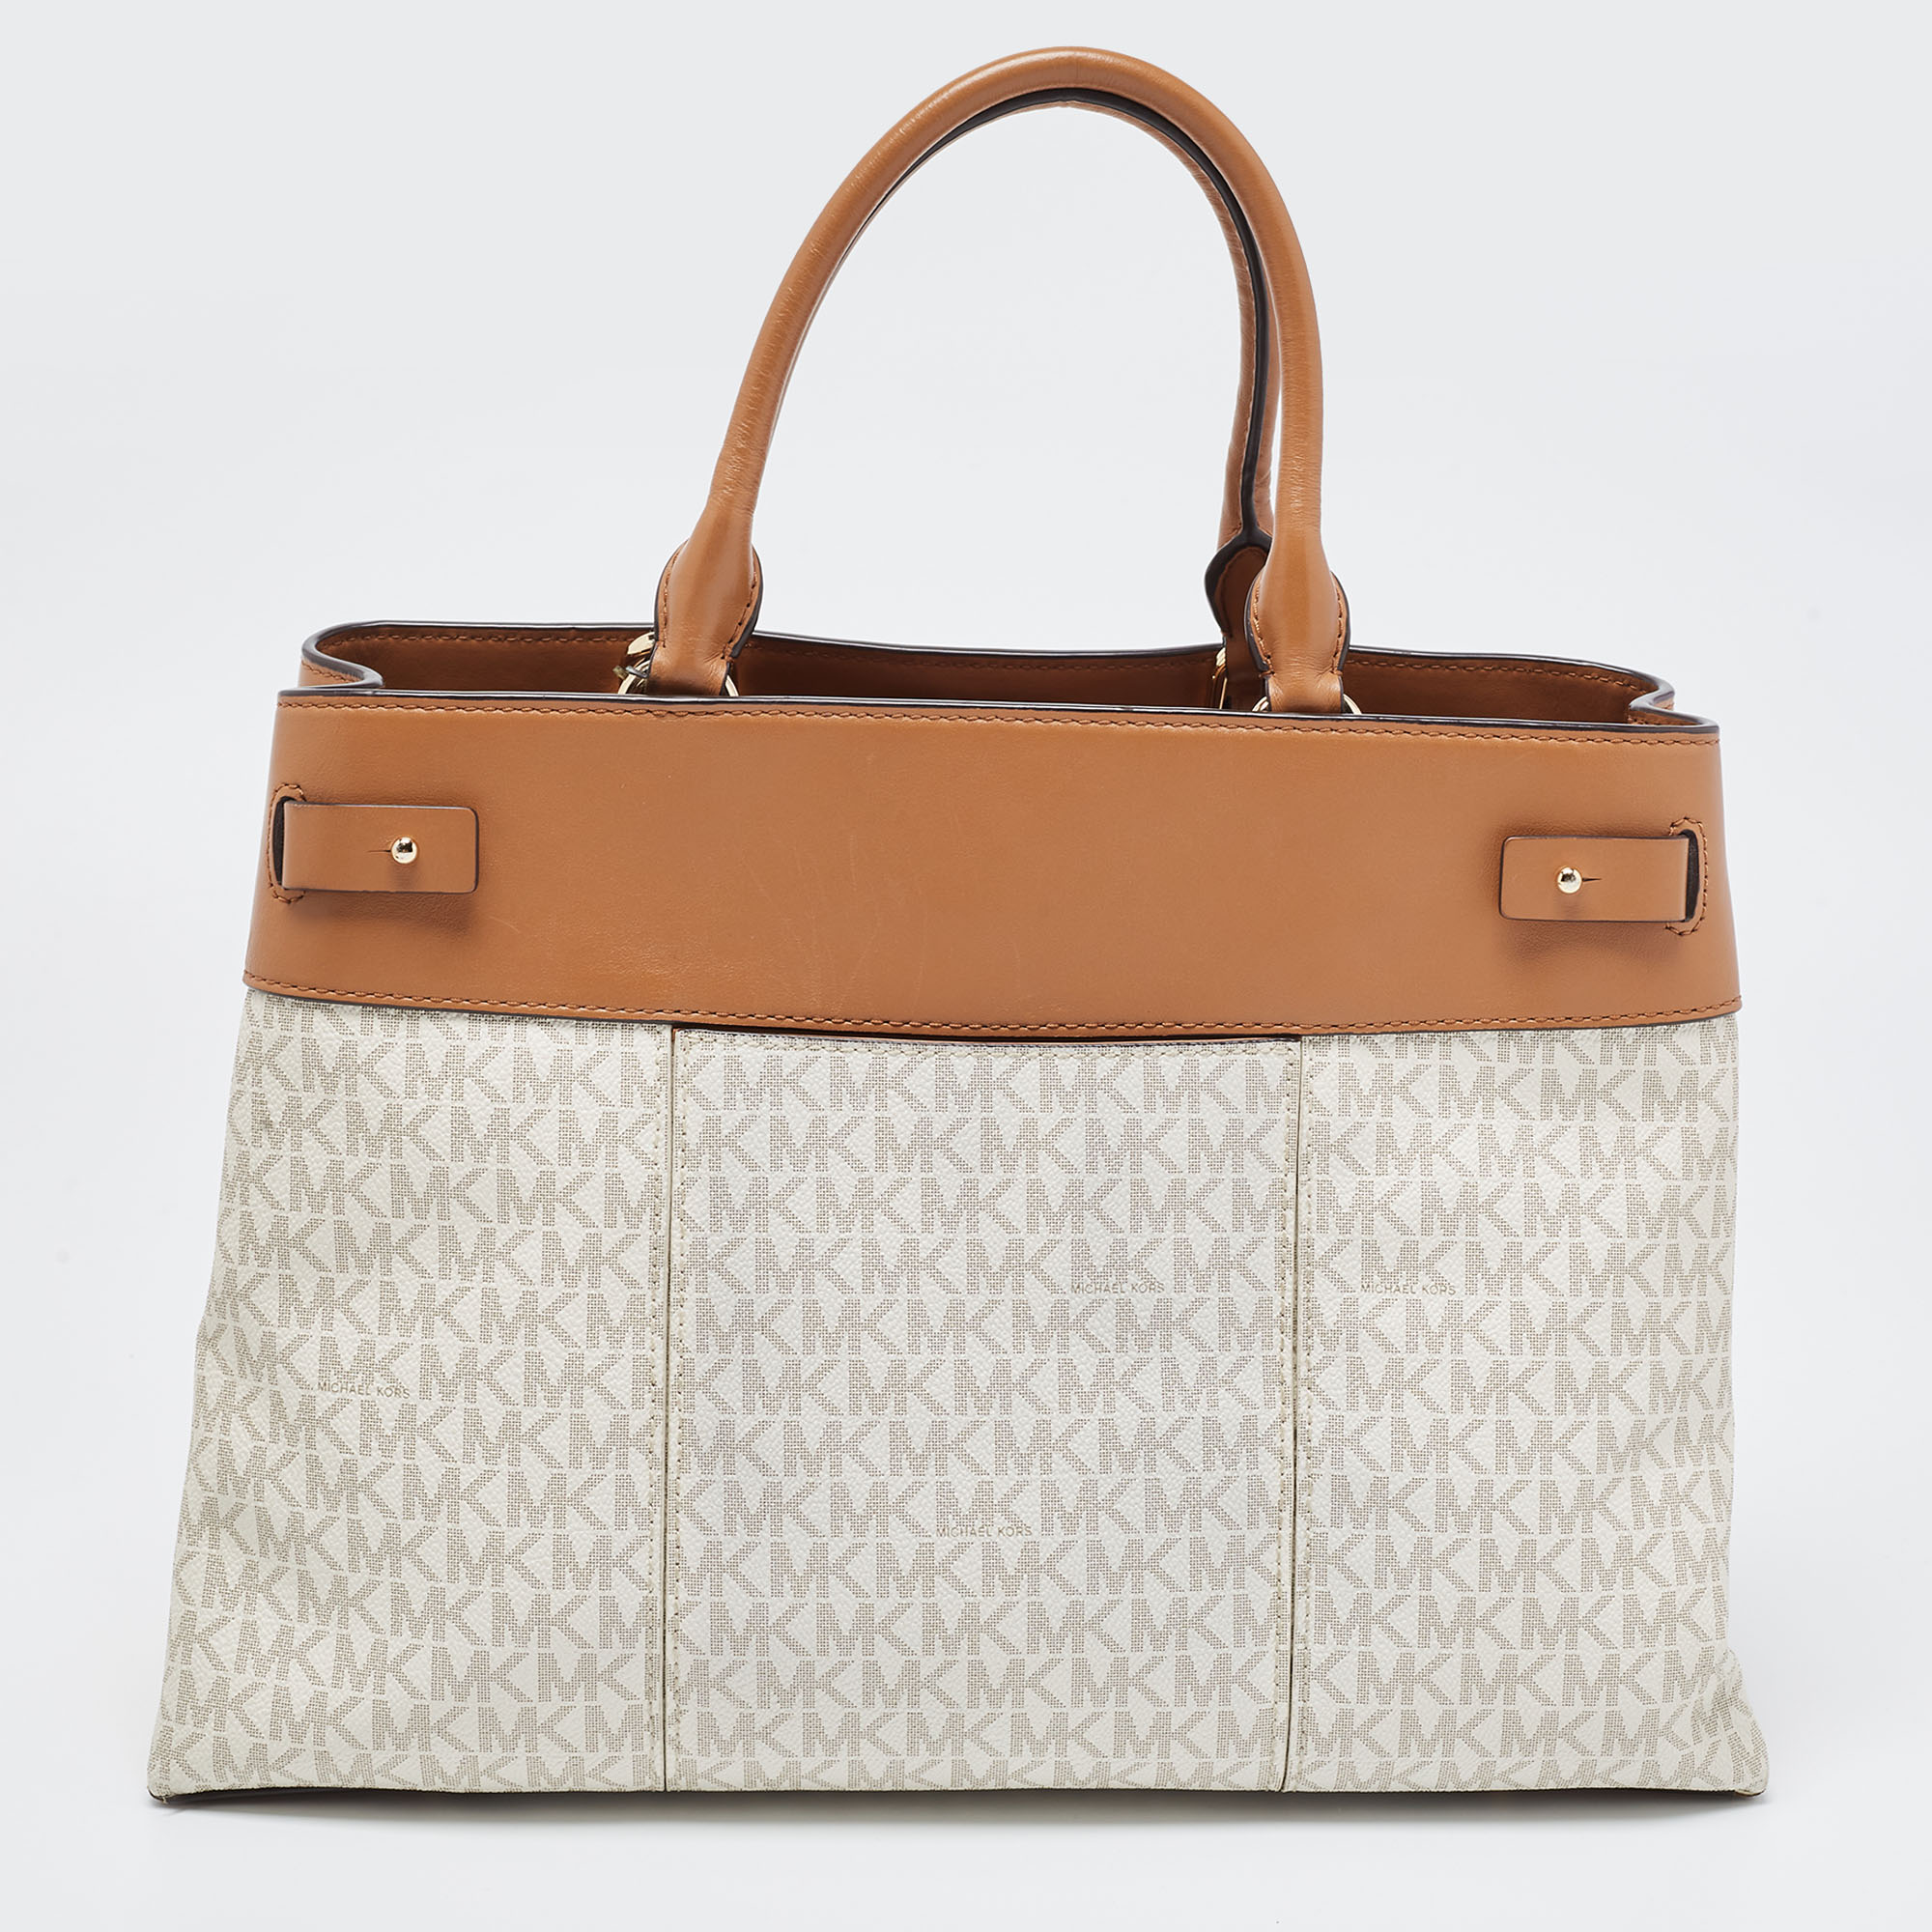 Michael Kors Beige/Tan Signature Coated Canvas And Leather Gramercy Tote